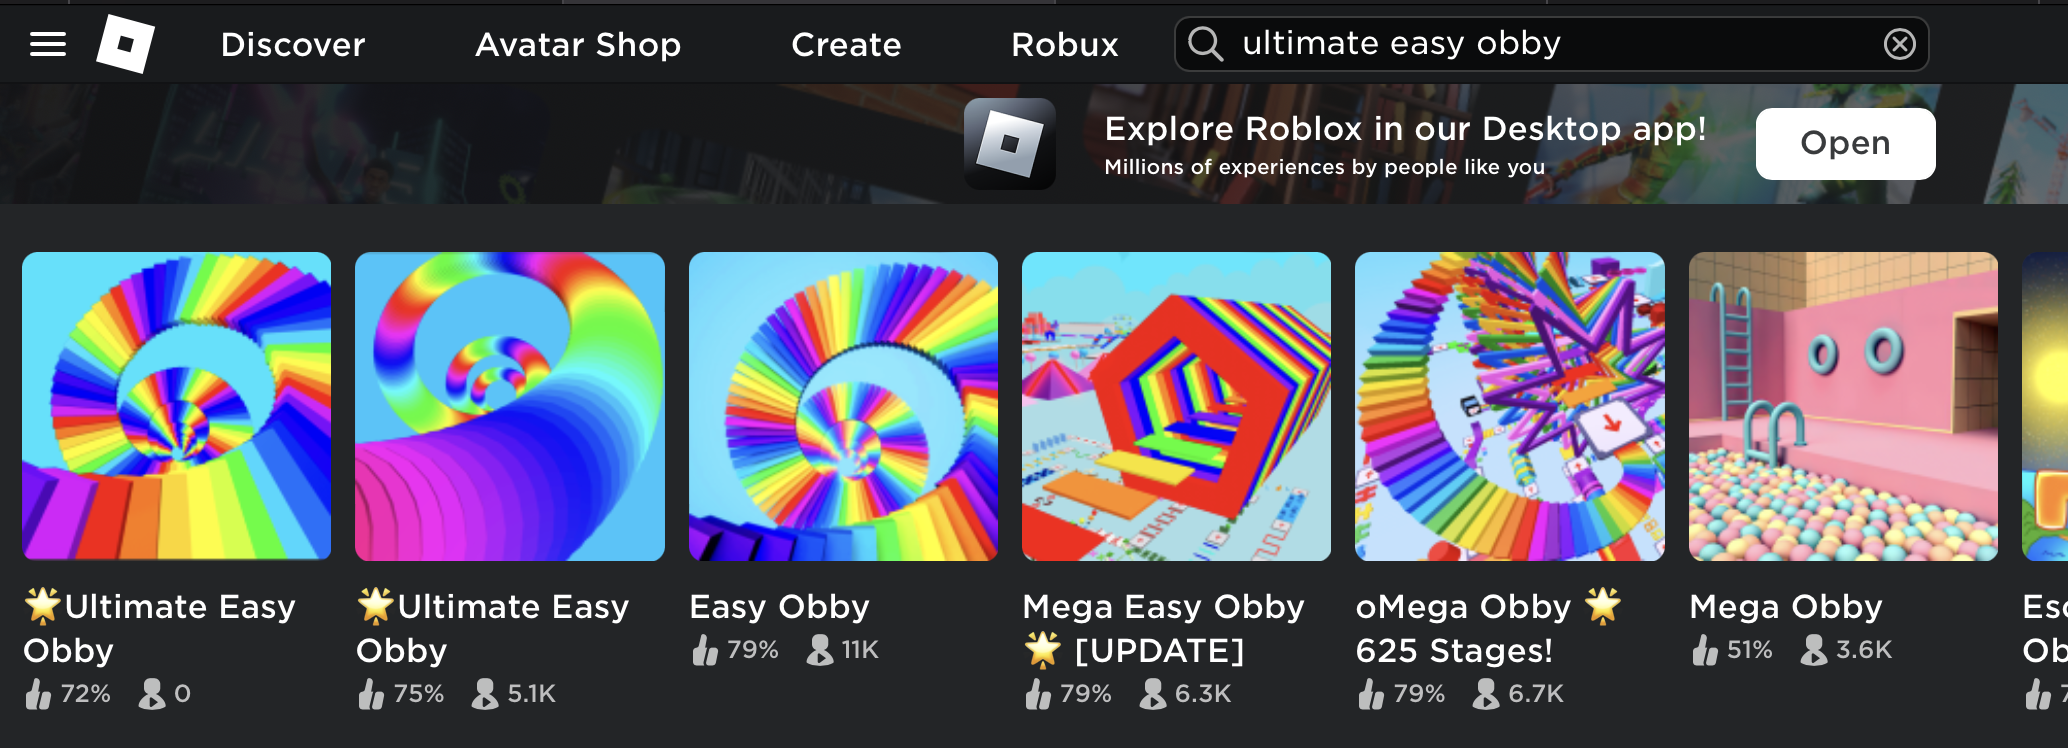 Roblox search is inaccurate for our game - Website Bugs